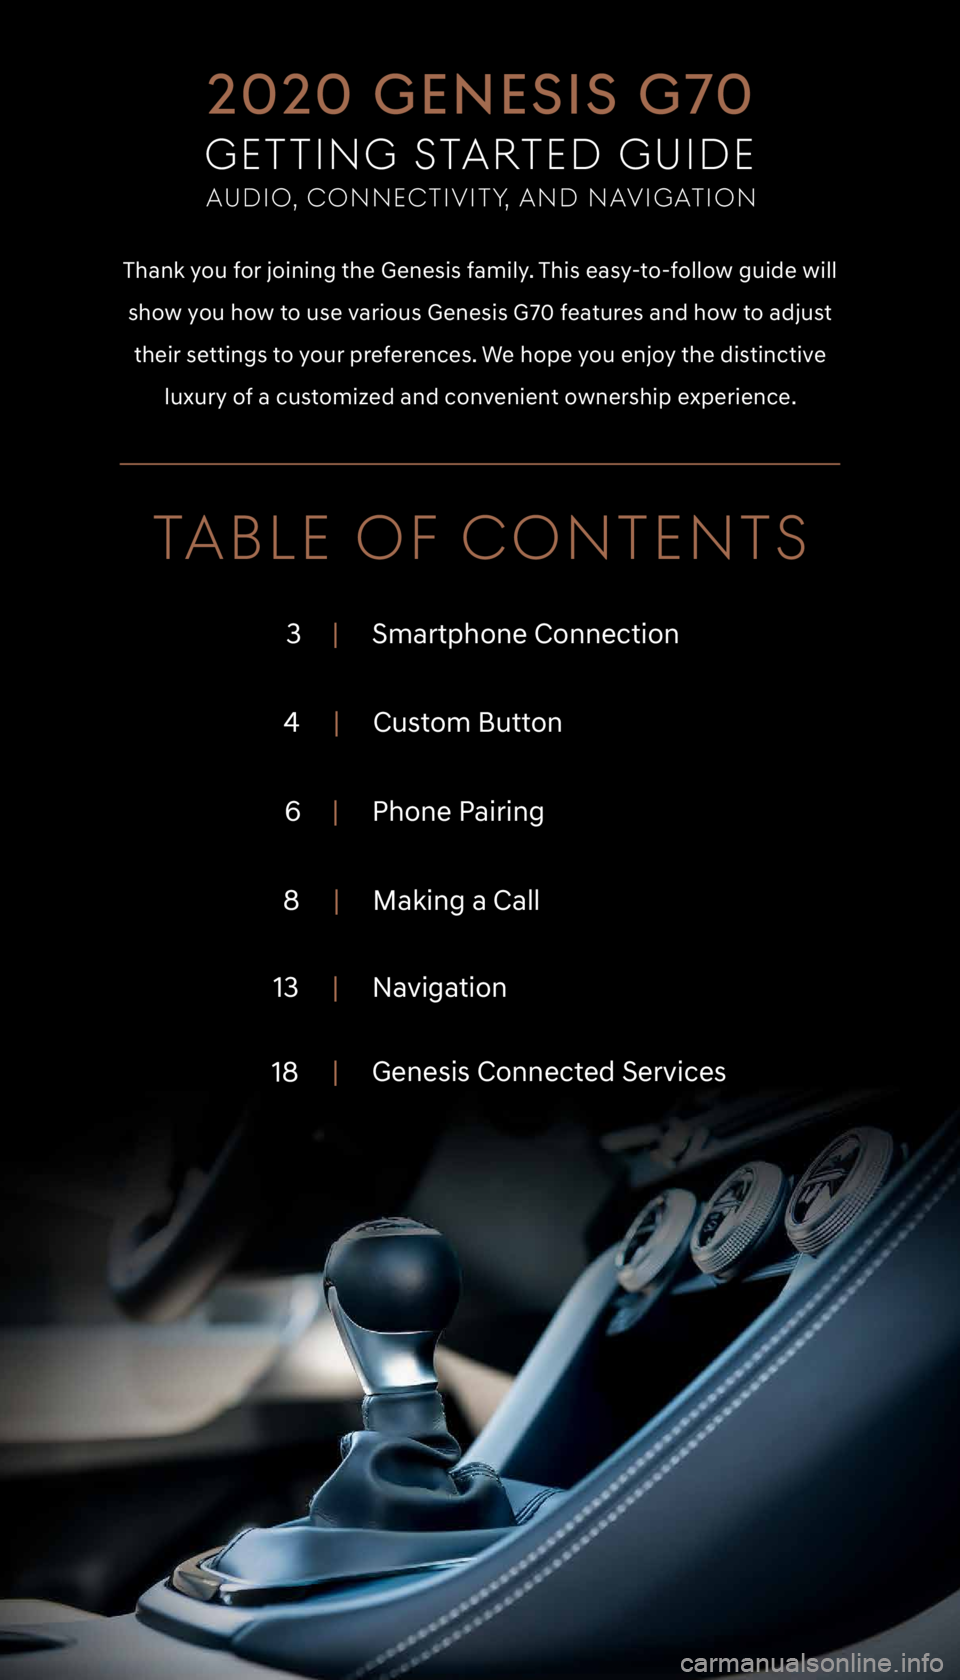 GENESIS G70 2020  Getting Started Guide TABLE OF CONTENTS
3|     Smartphone Connection
4 |     Custom Button
6 |     Phone Pairing
8 |     Making a Call
13 |     Navigation
18 |
     Genesis Connected Services 
Thank you for joining the Gen